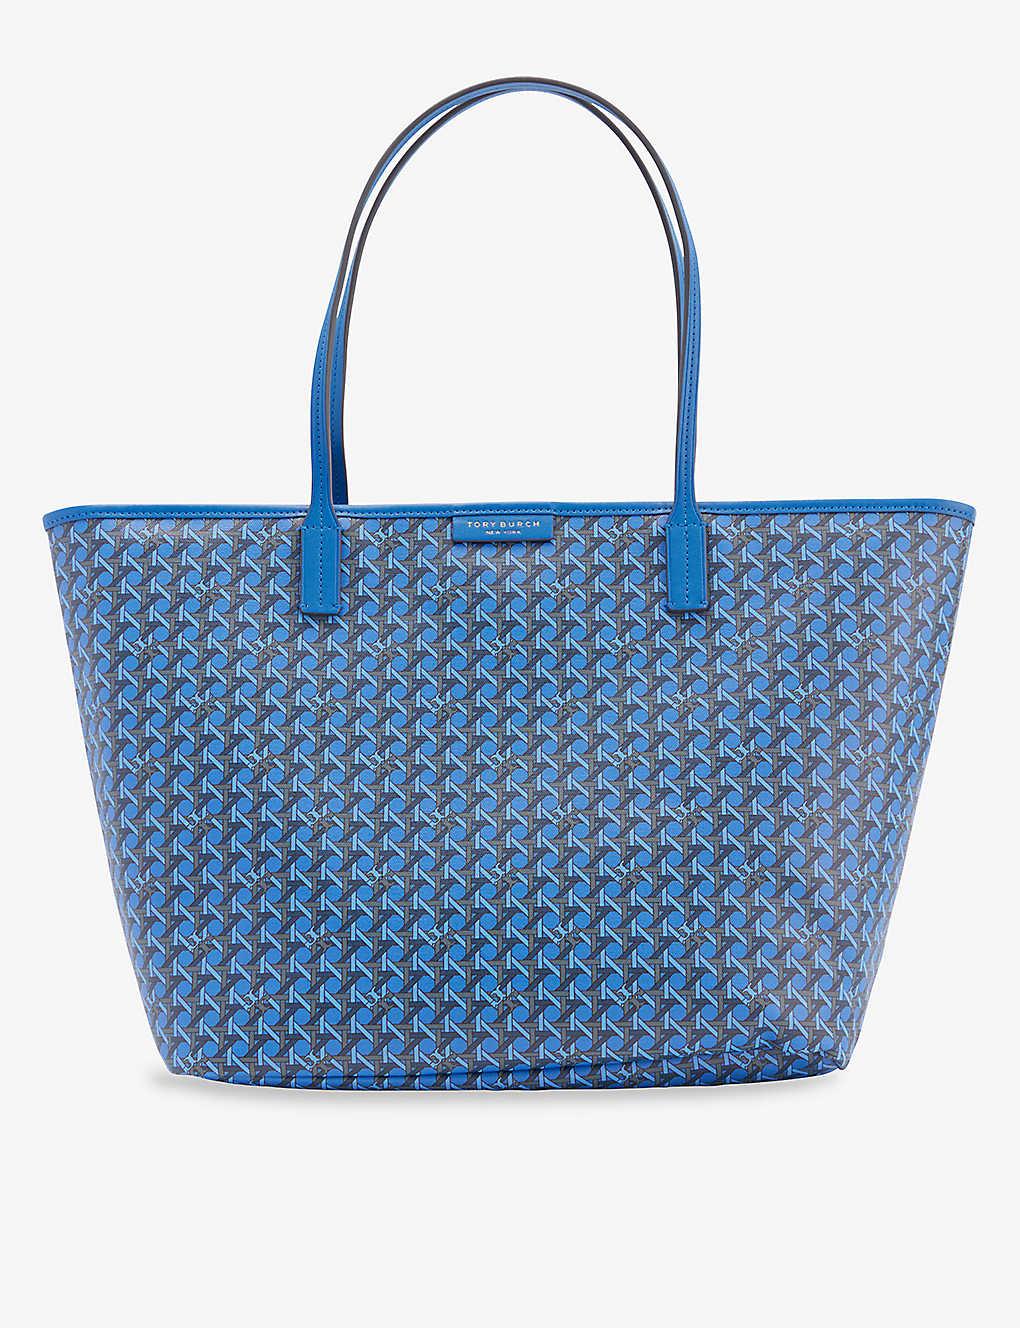 Tory Burch T-monogram Cotton Tote Bag in Blue | Lyst